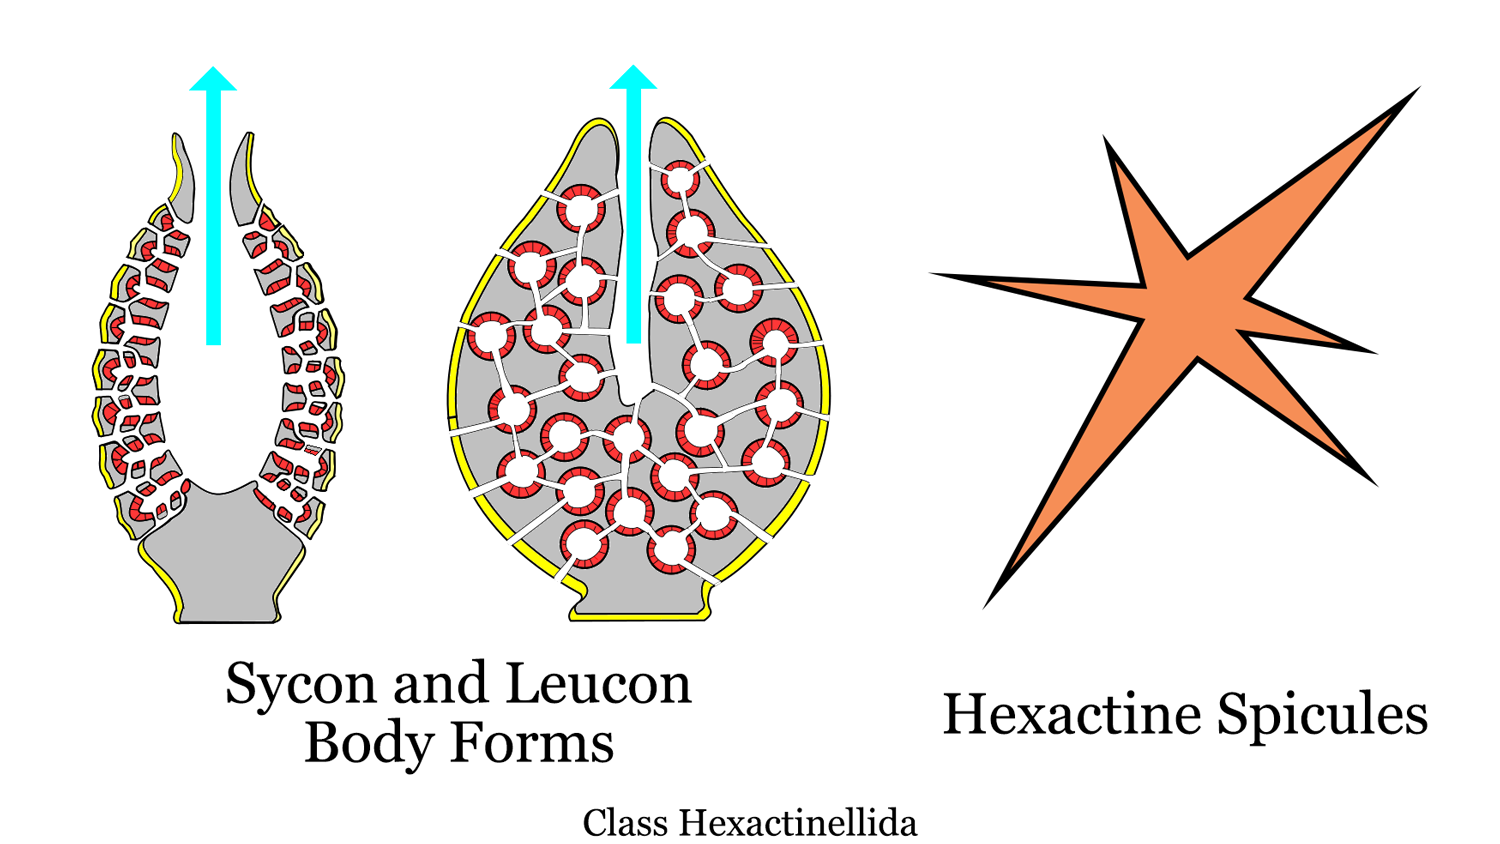 Diagram showing Hexactinellida body plan and spicules